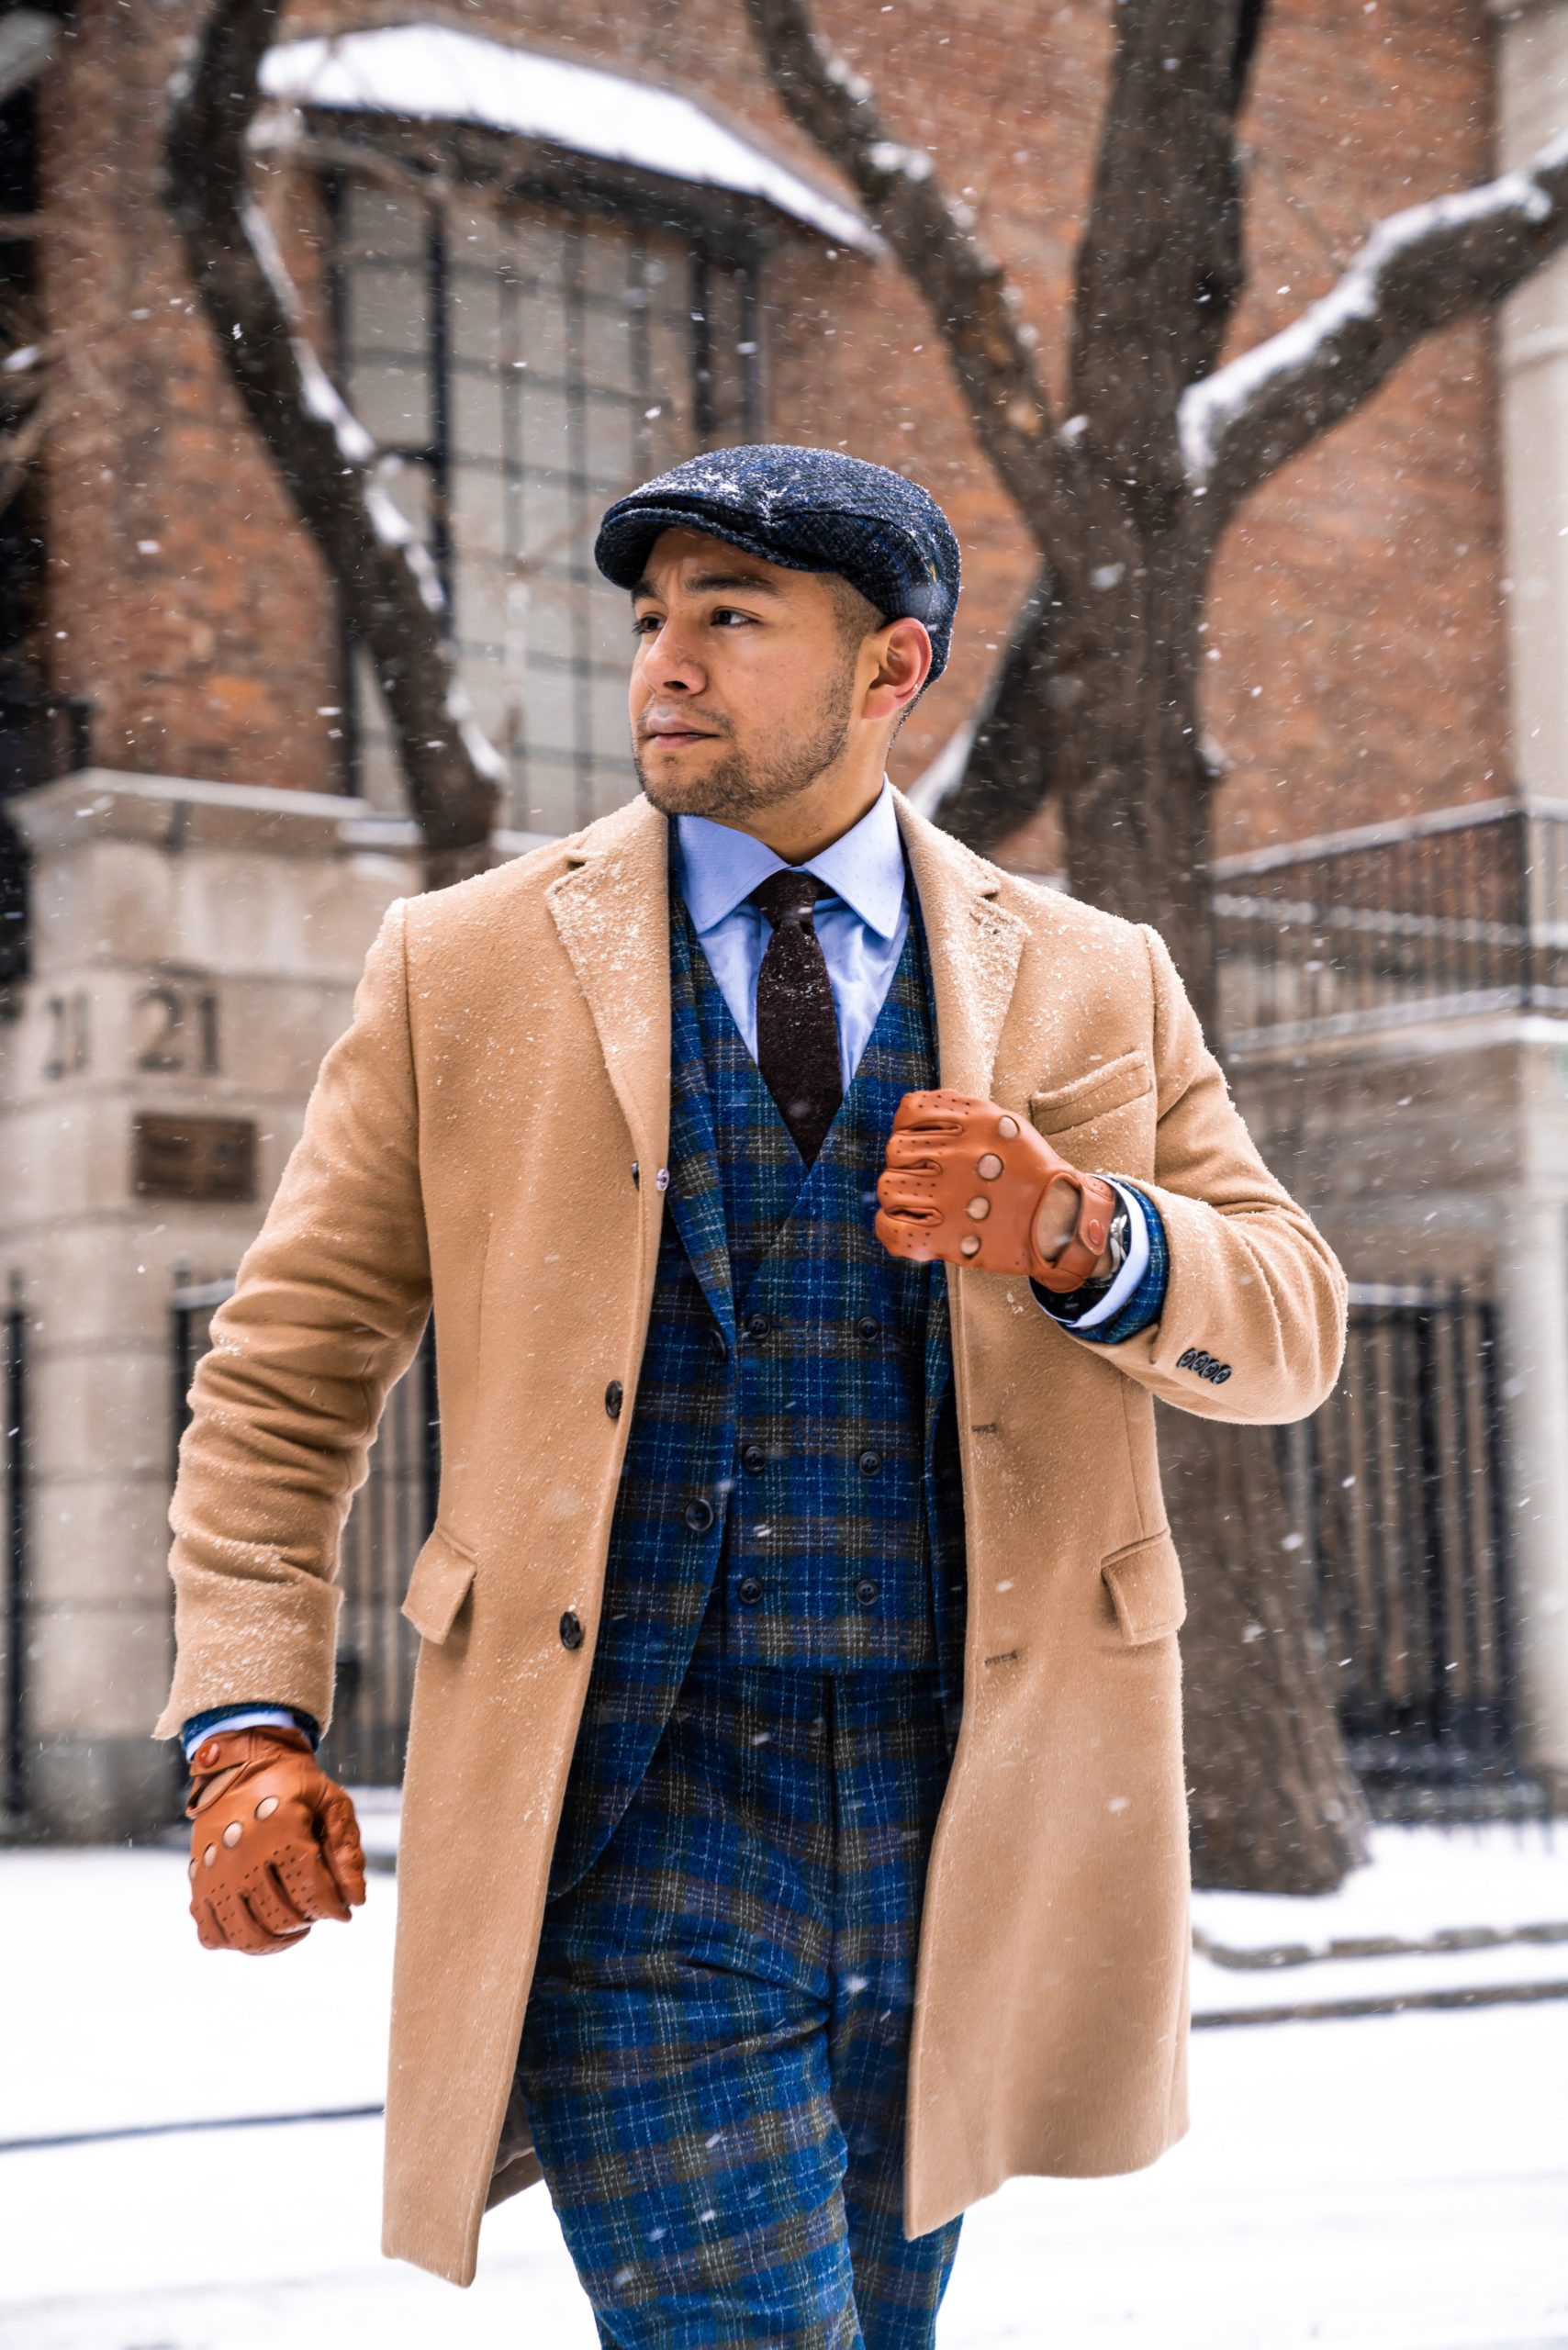 BLUE CHECK TWEED EFFECT THREE-PIECE SUIT - dandy in the bronx - blue shirt and brown tie - thedrop.co suit - camel coat and Irish hat - snow